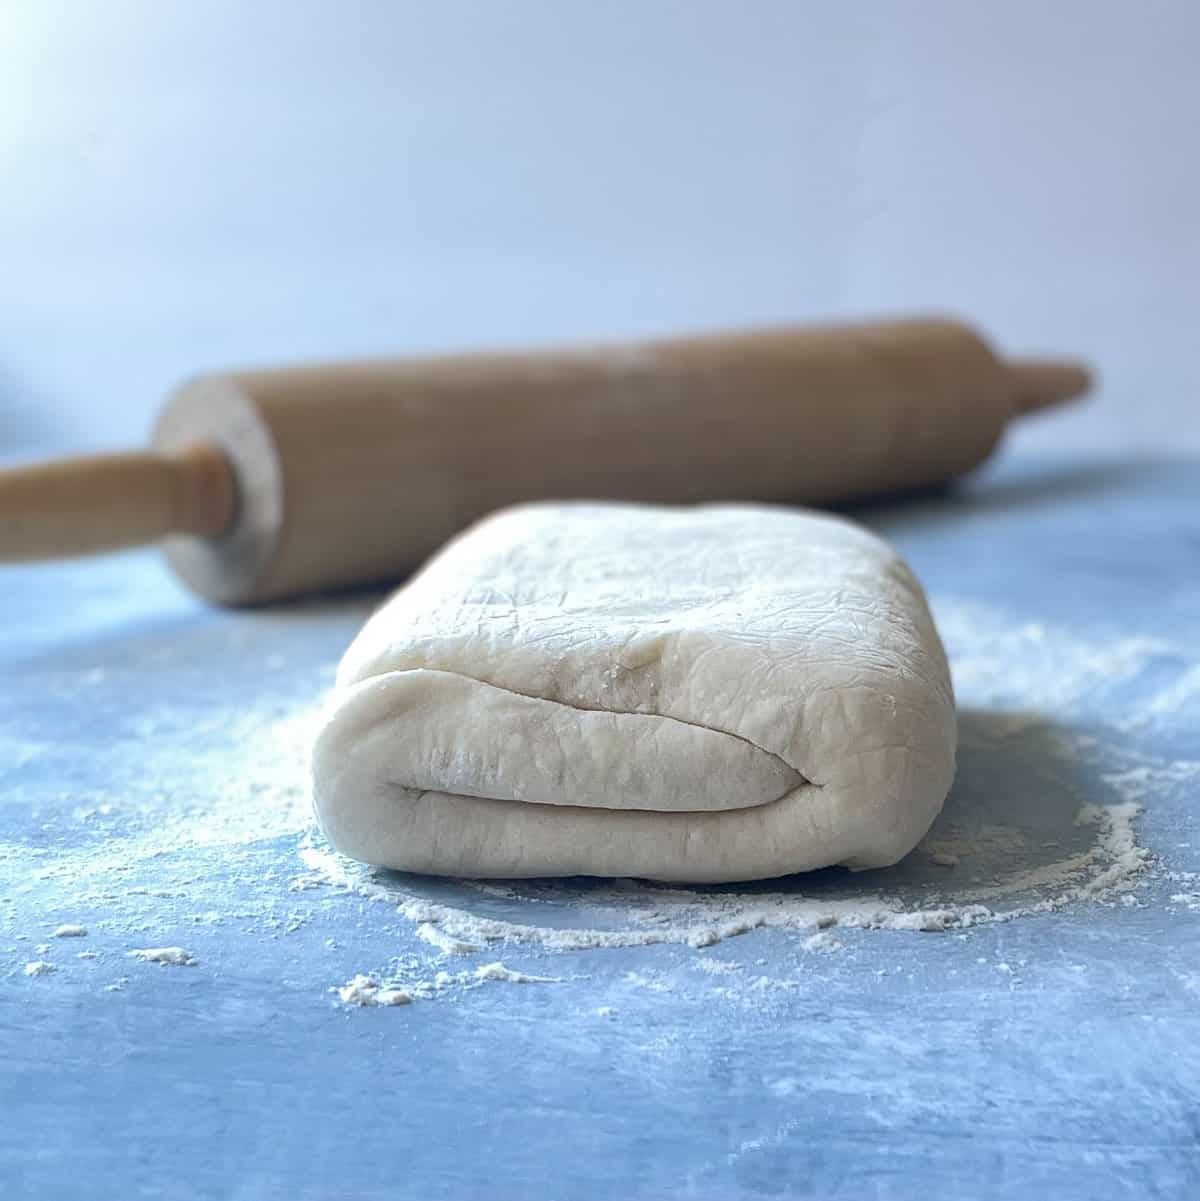 folded puff pastry and rolling pin on flour-dusted countertop.